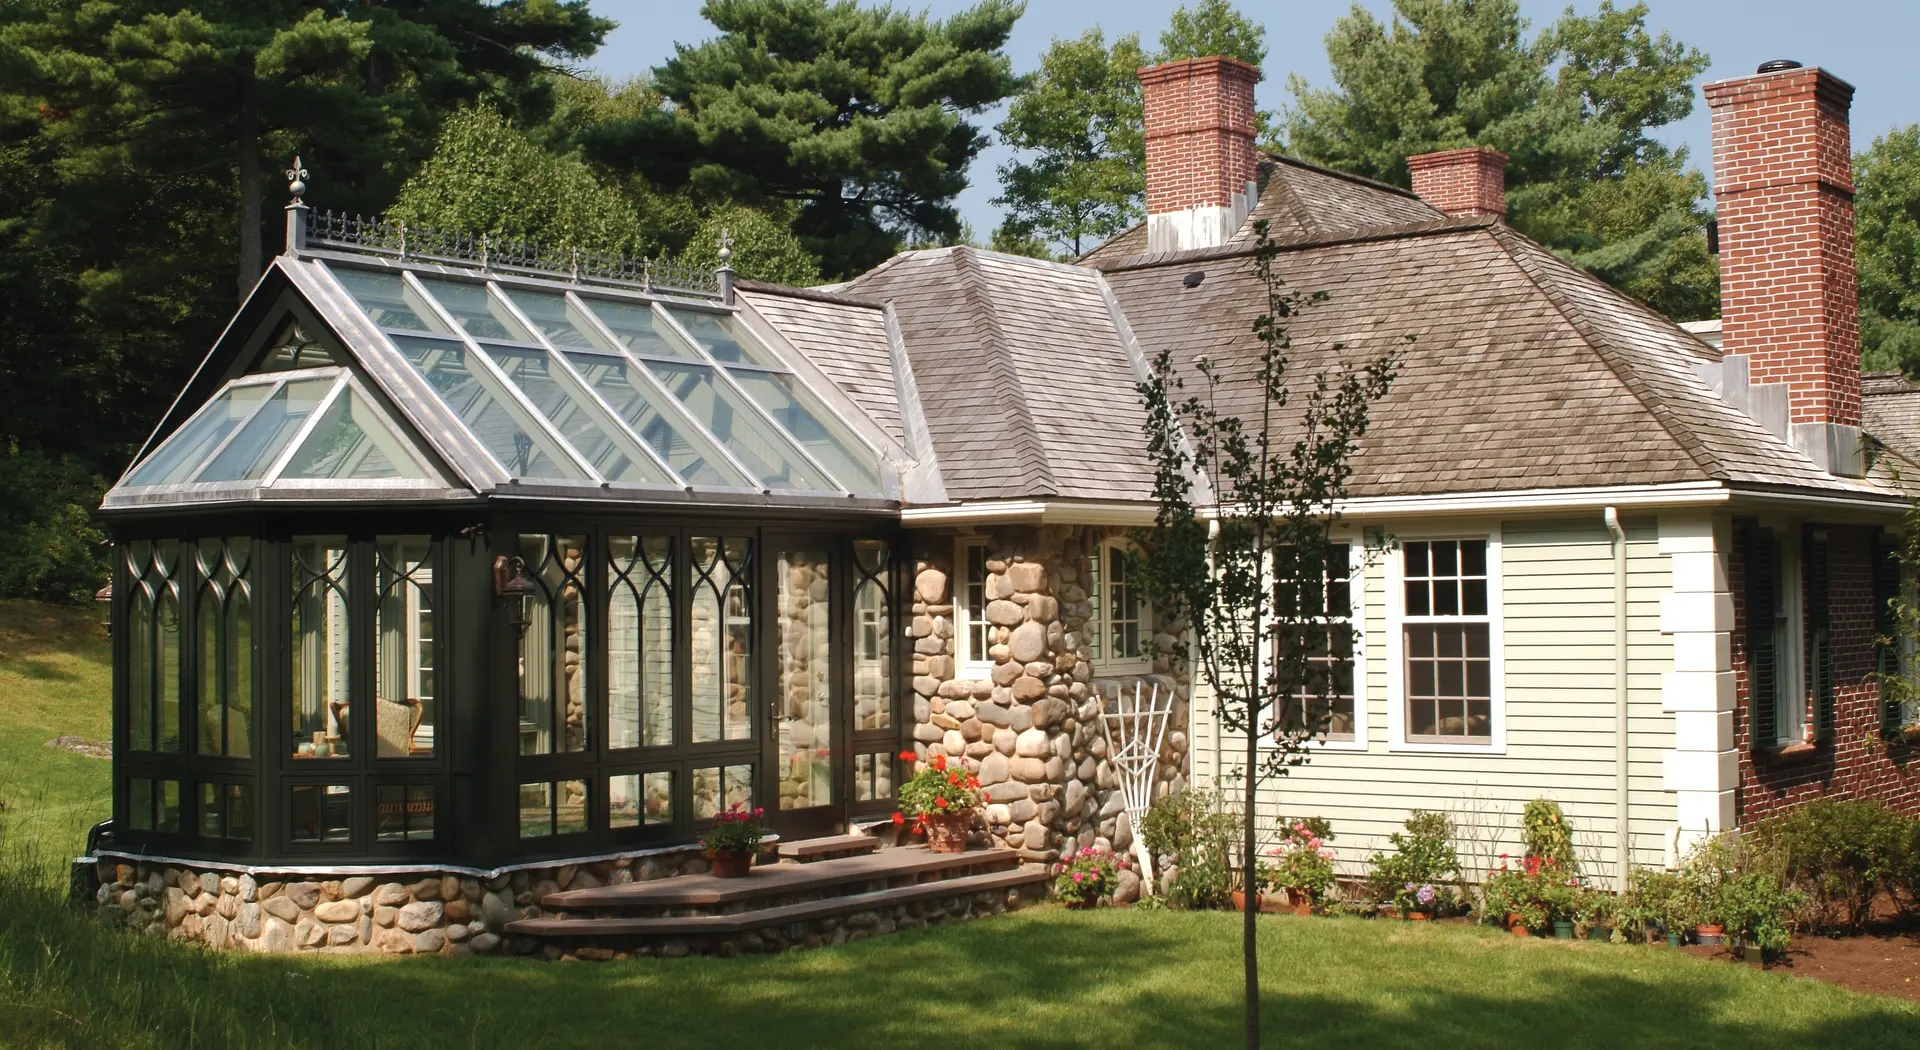 A house with a large glass roof and stone walls.